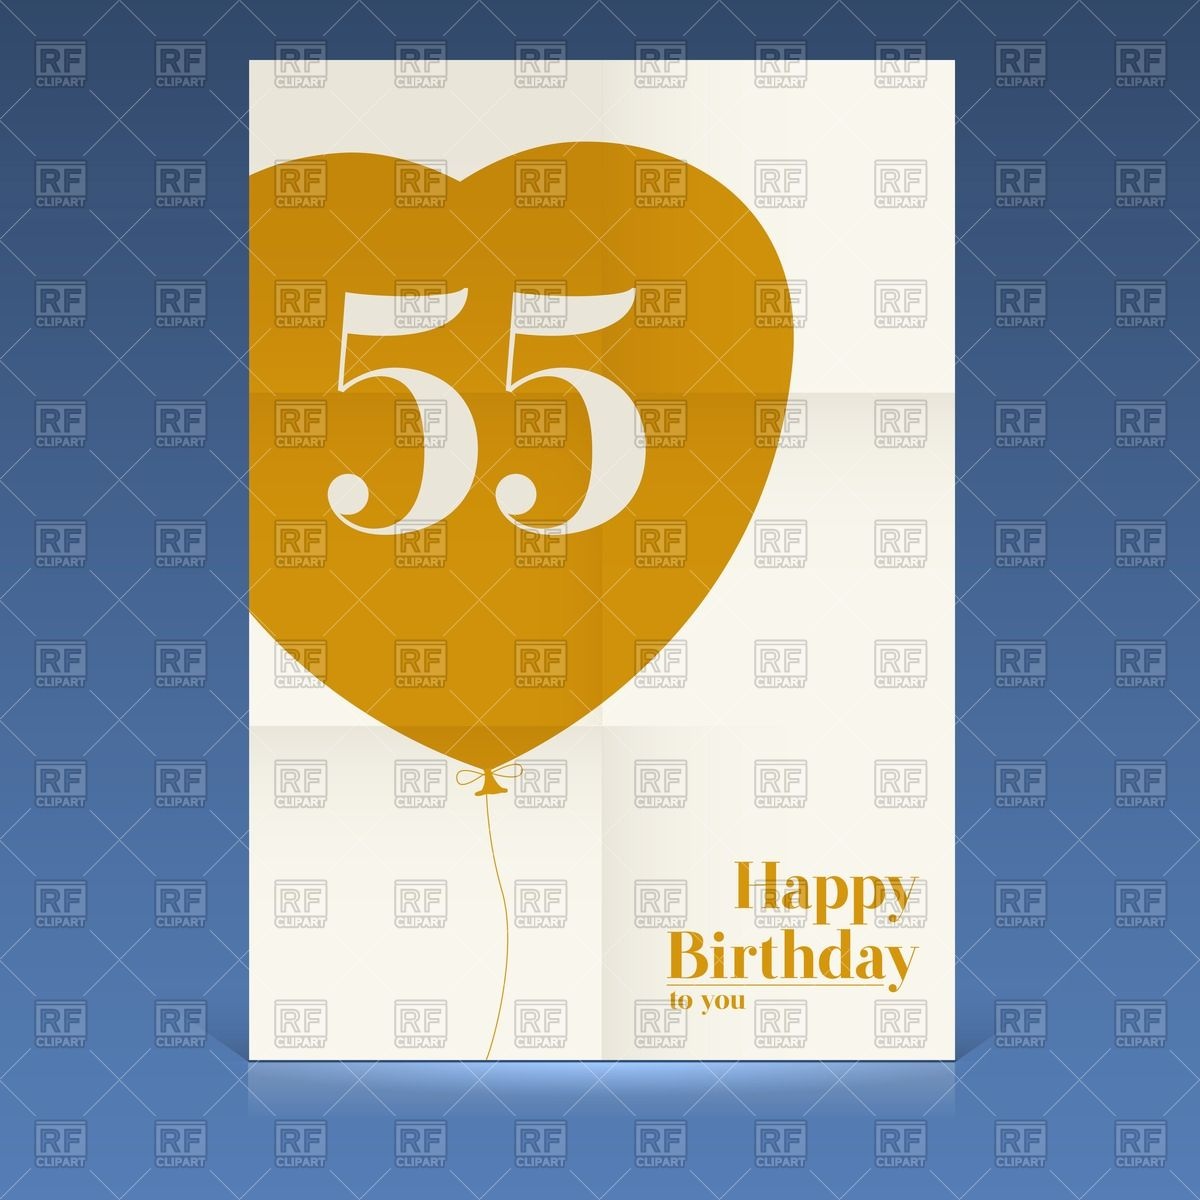 Birthday Paper Poster With Heart Shaped Balloon   55 Anniversary